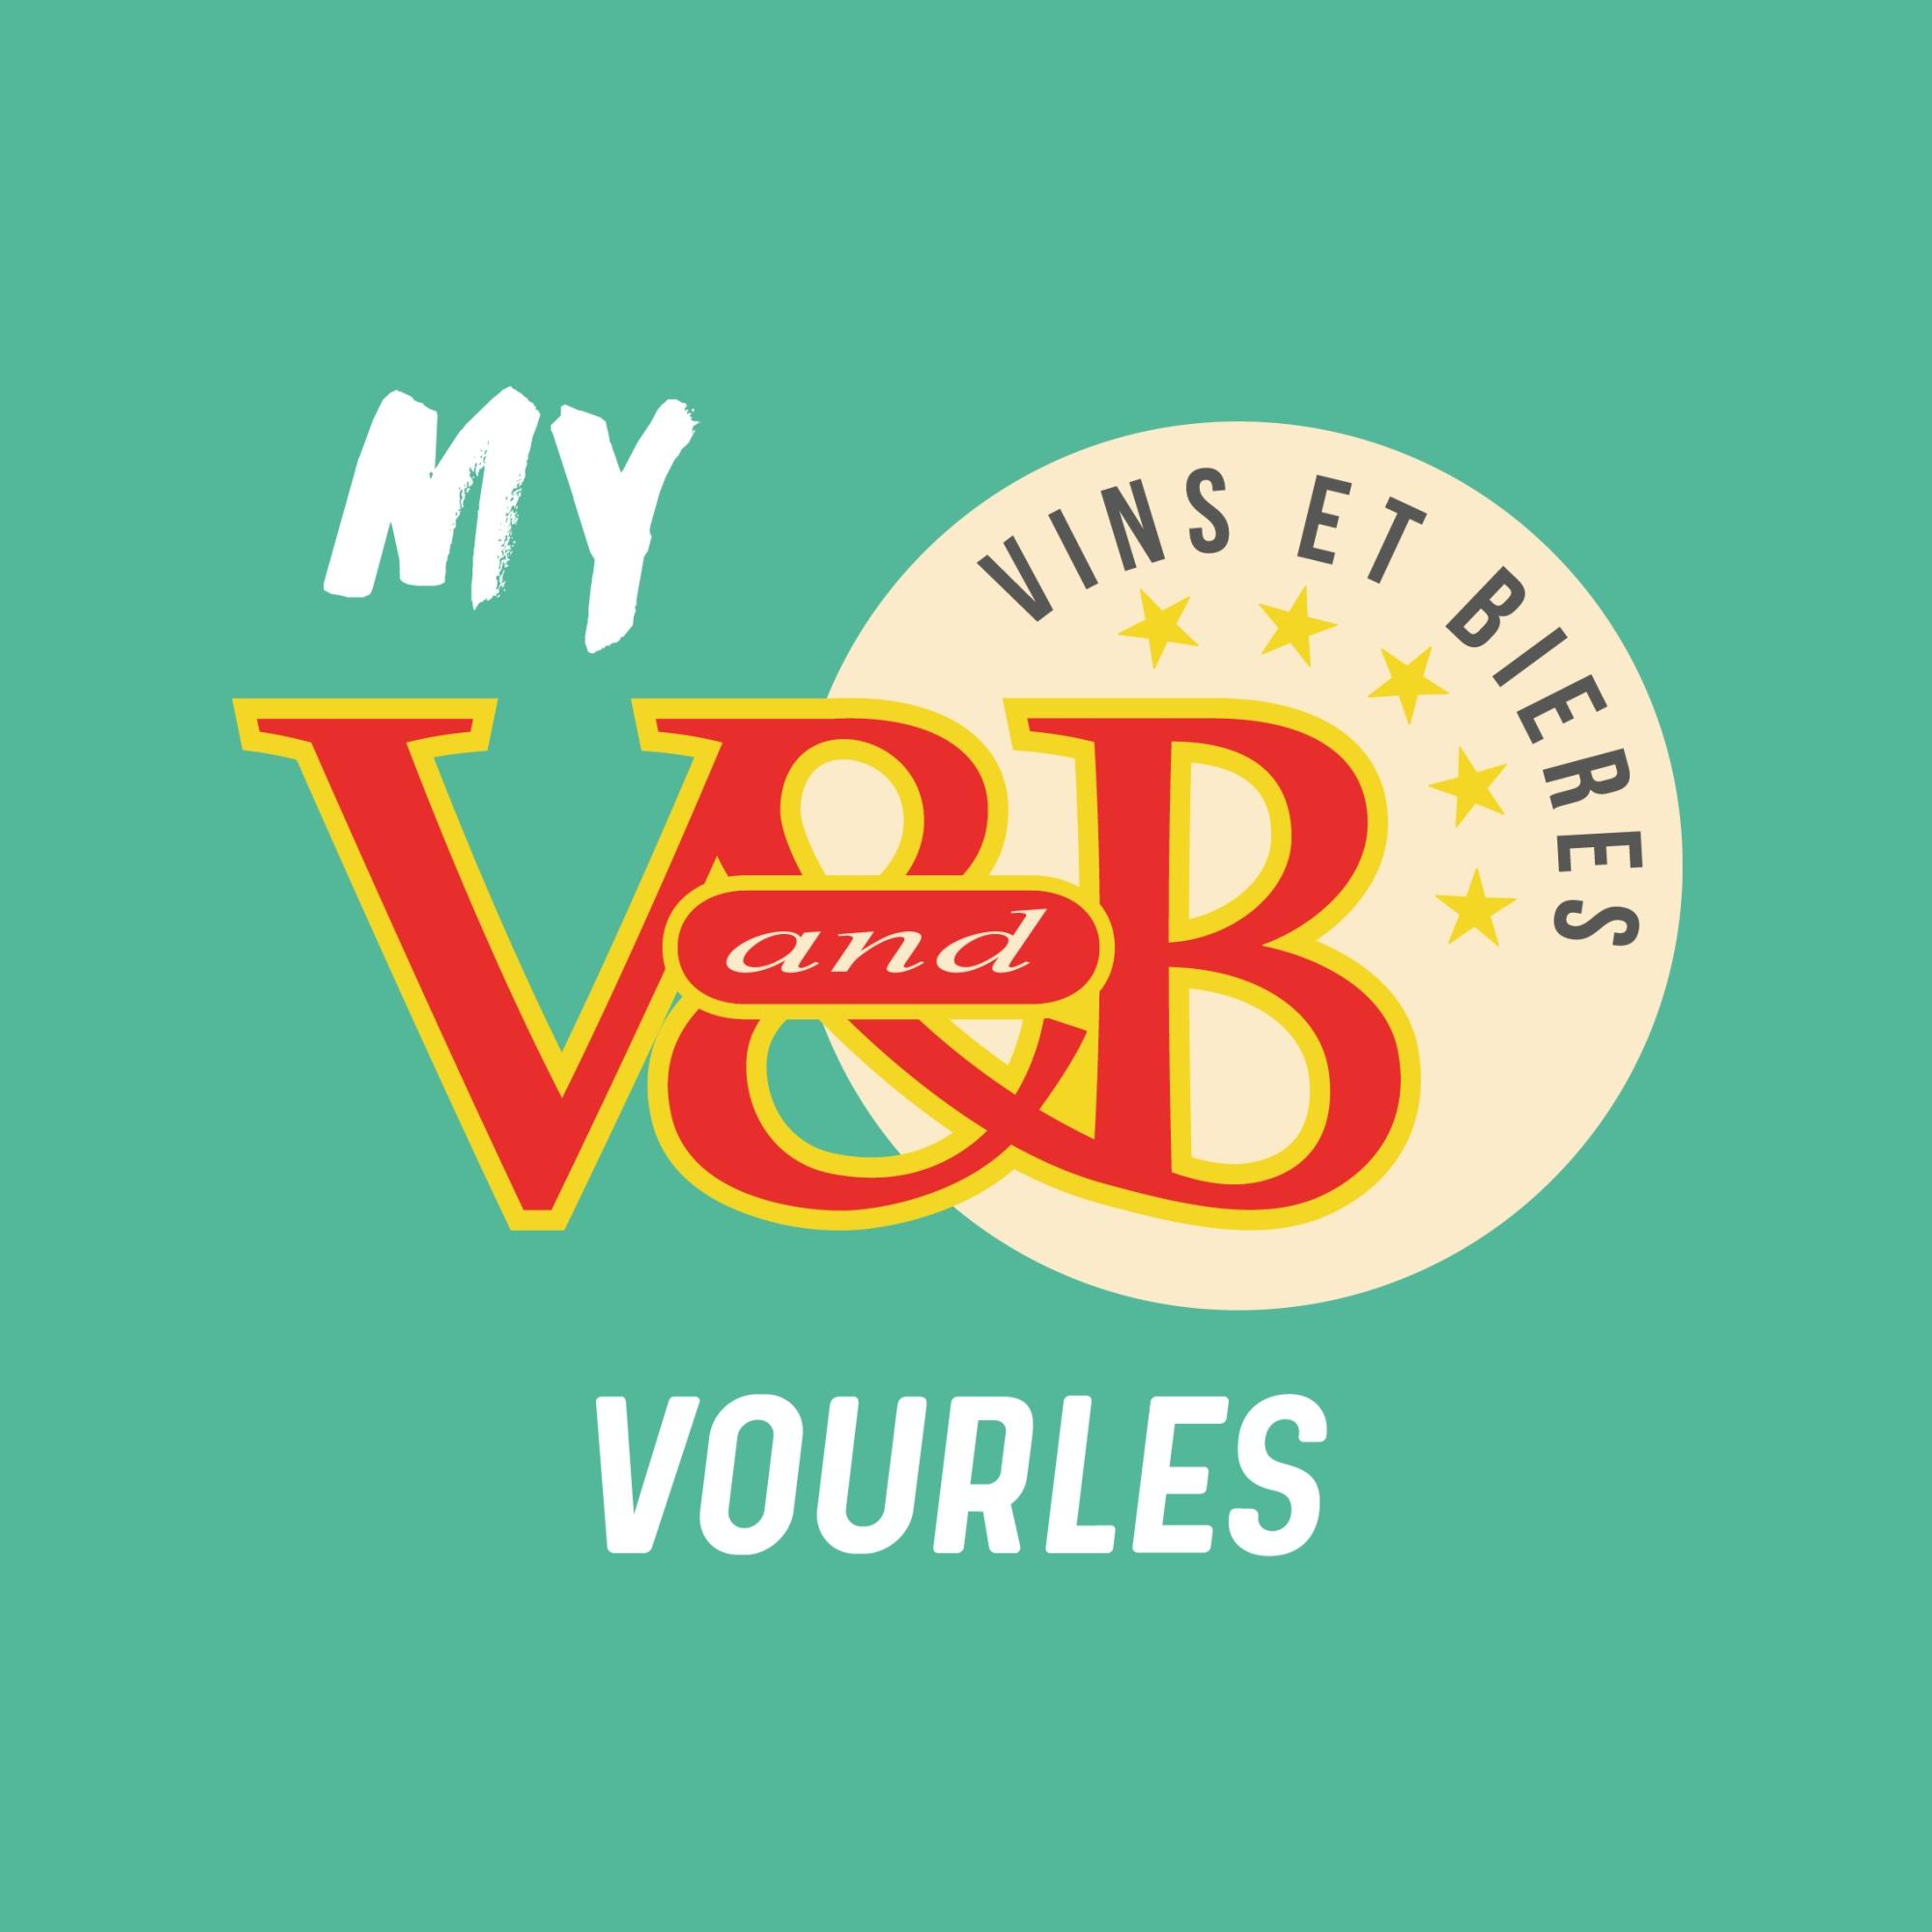 V And B Vourles